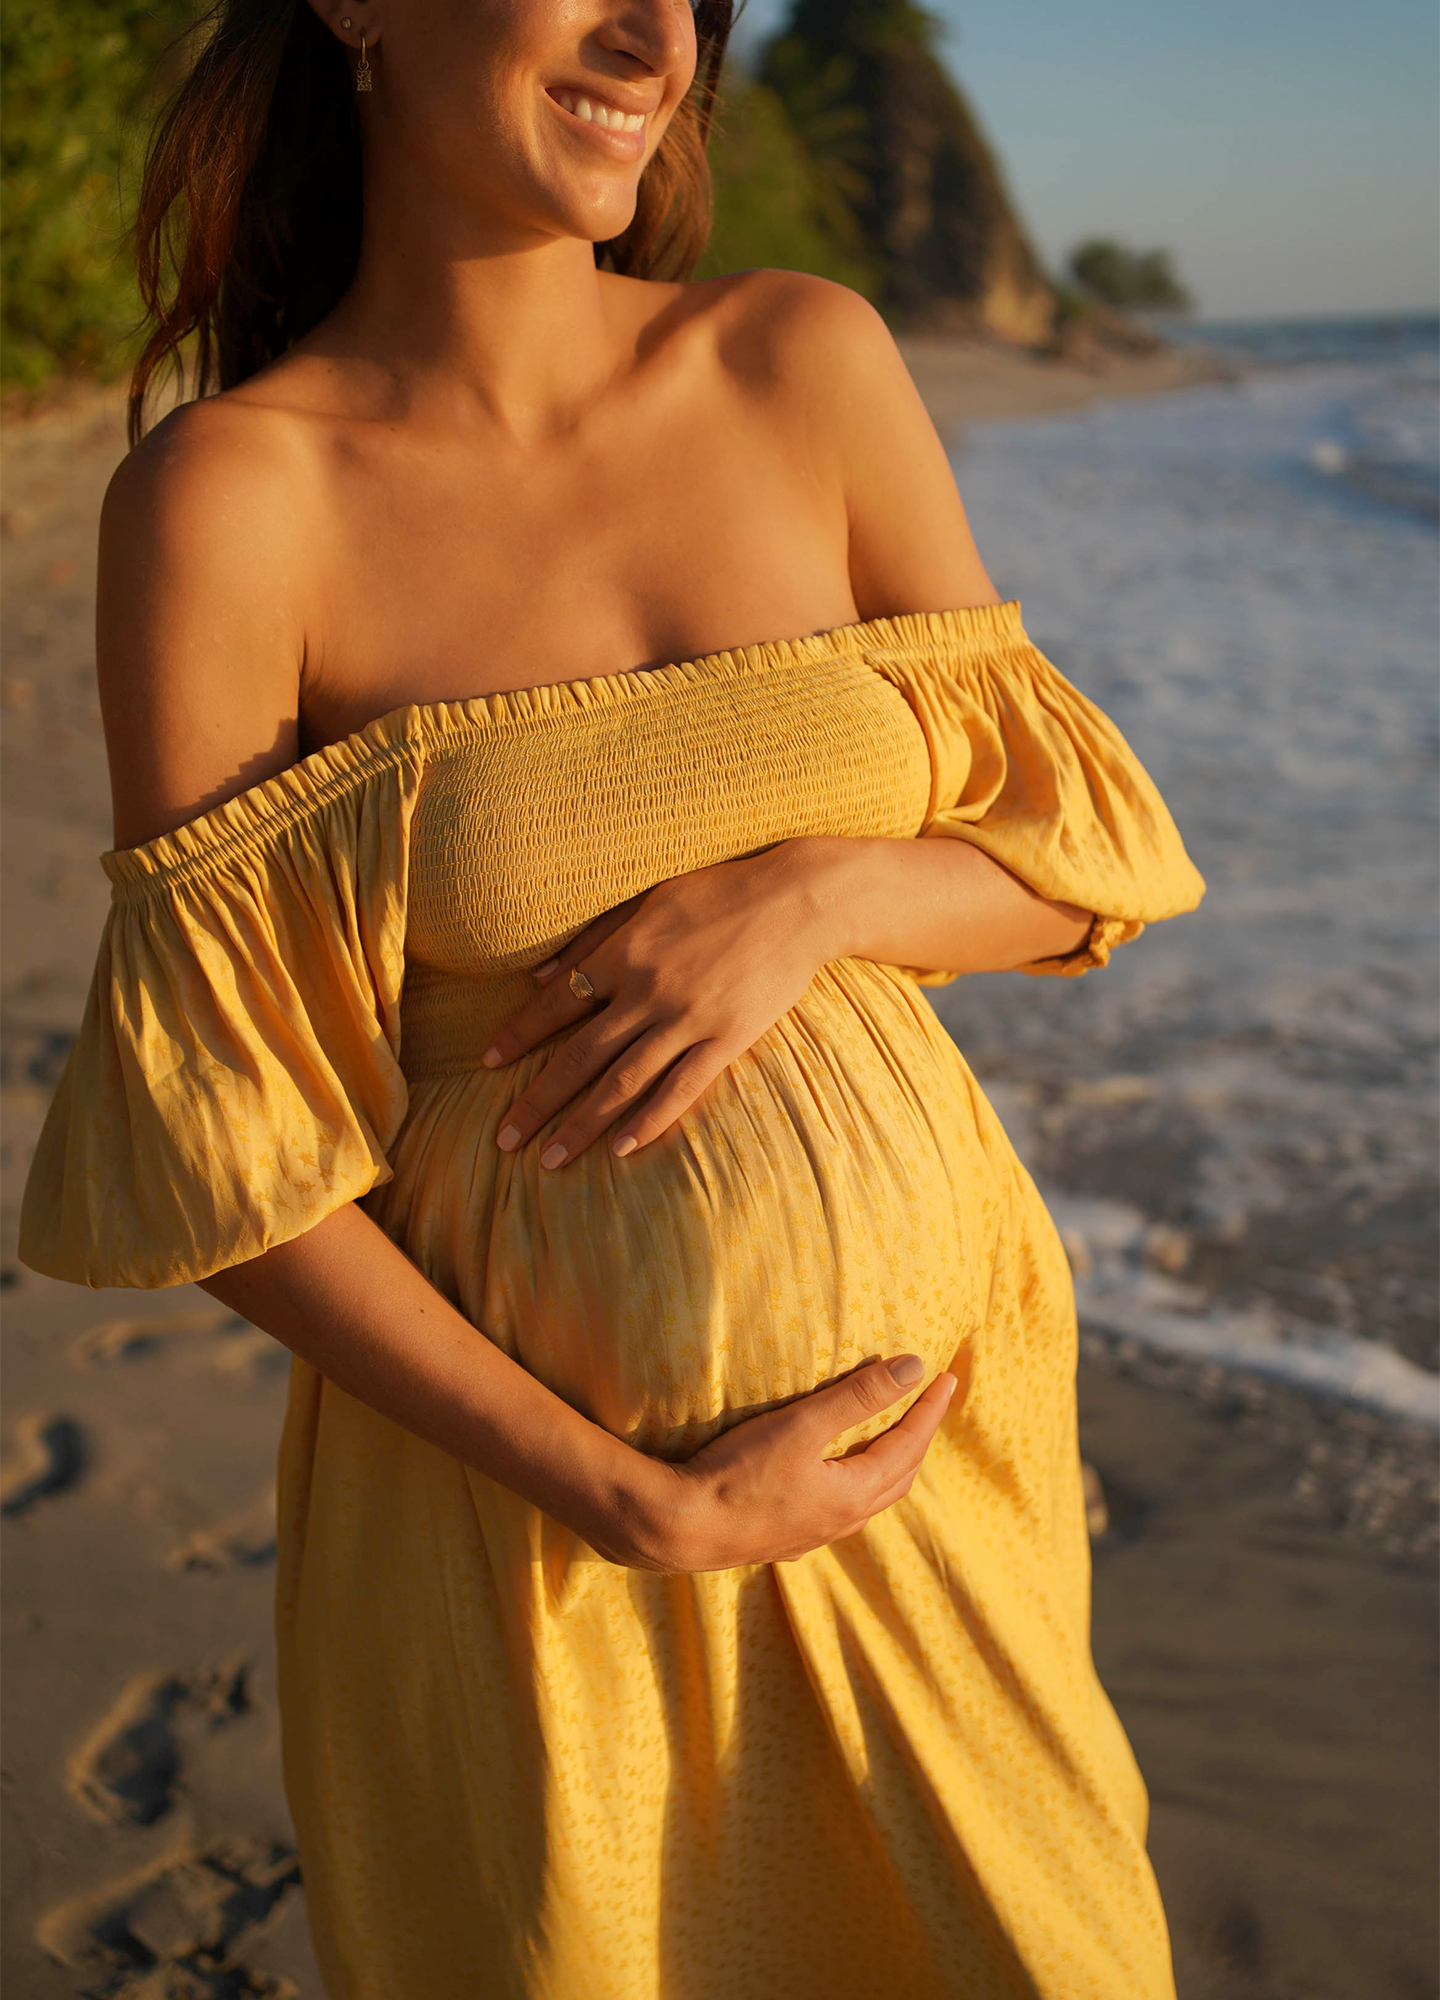 Pregnant Woman in Summer Maternity Dress